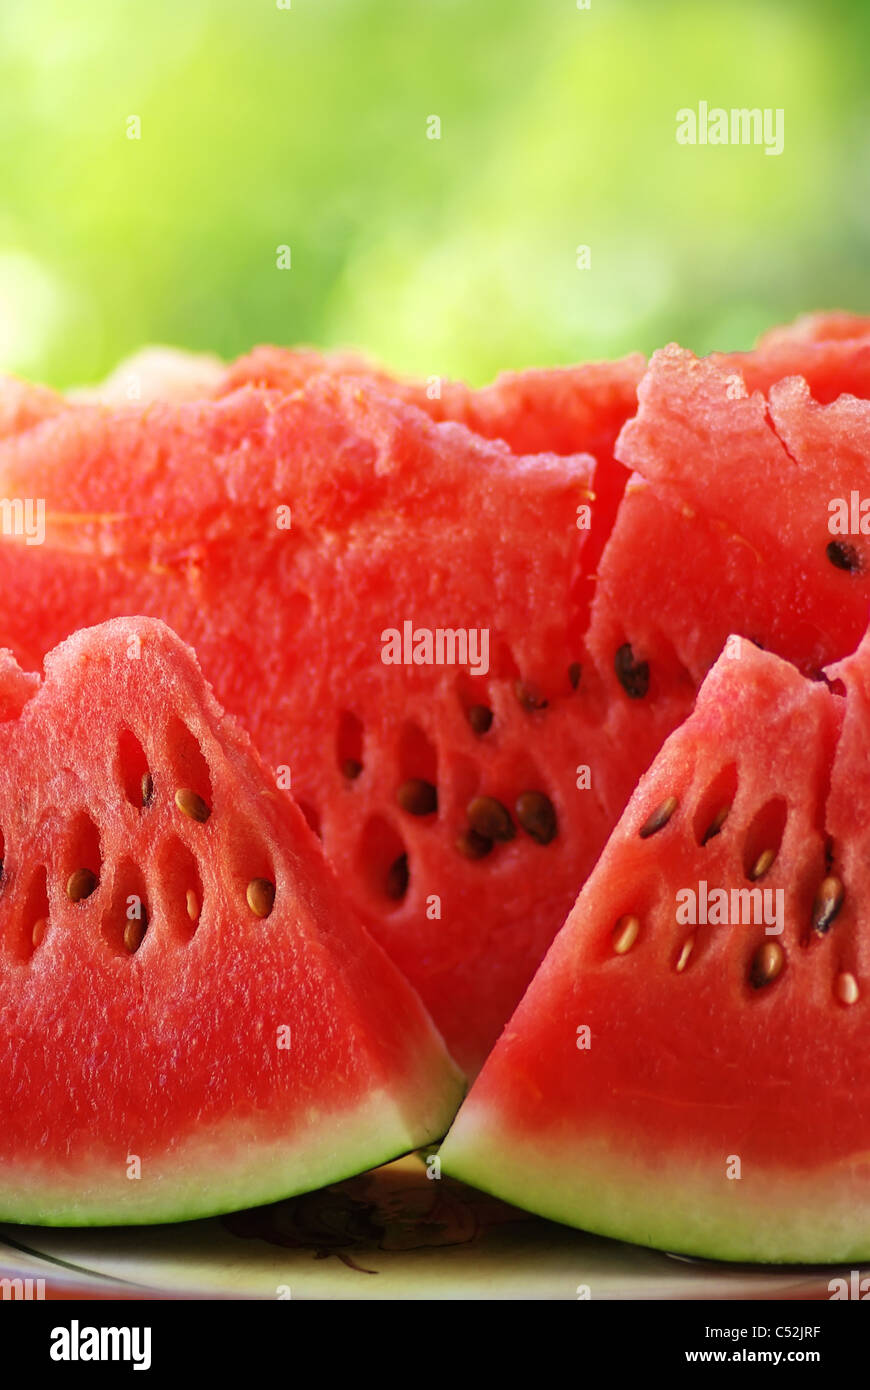 slices of red watermelon Stock Photo